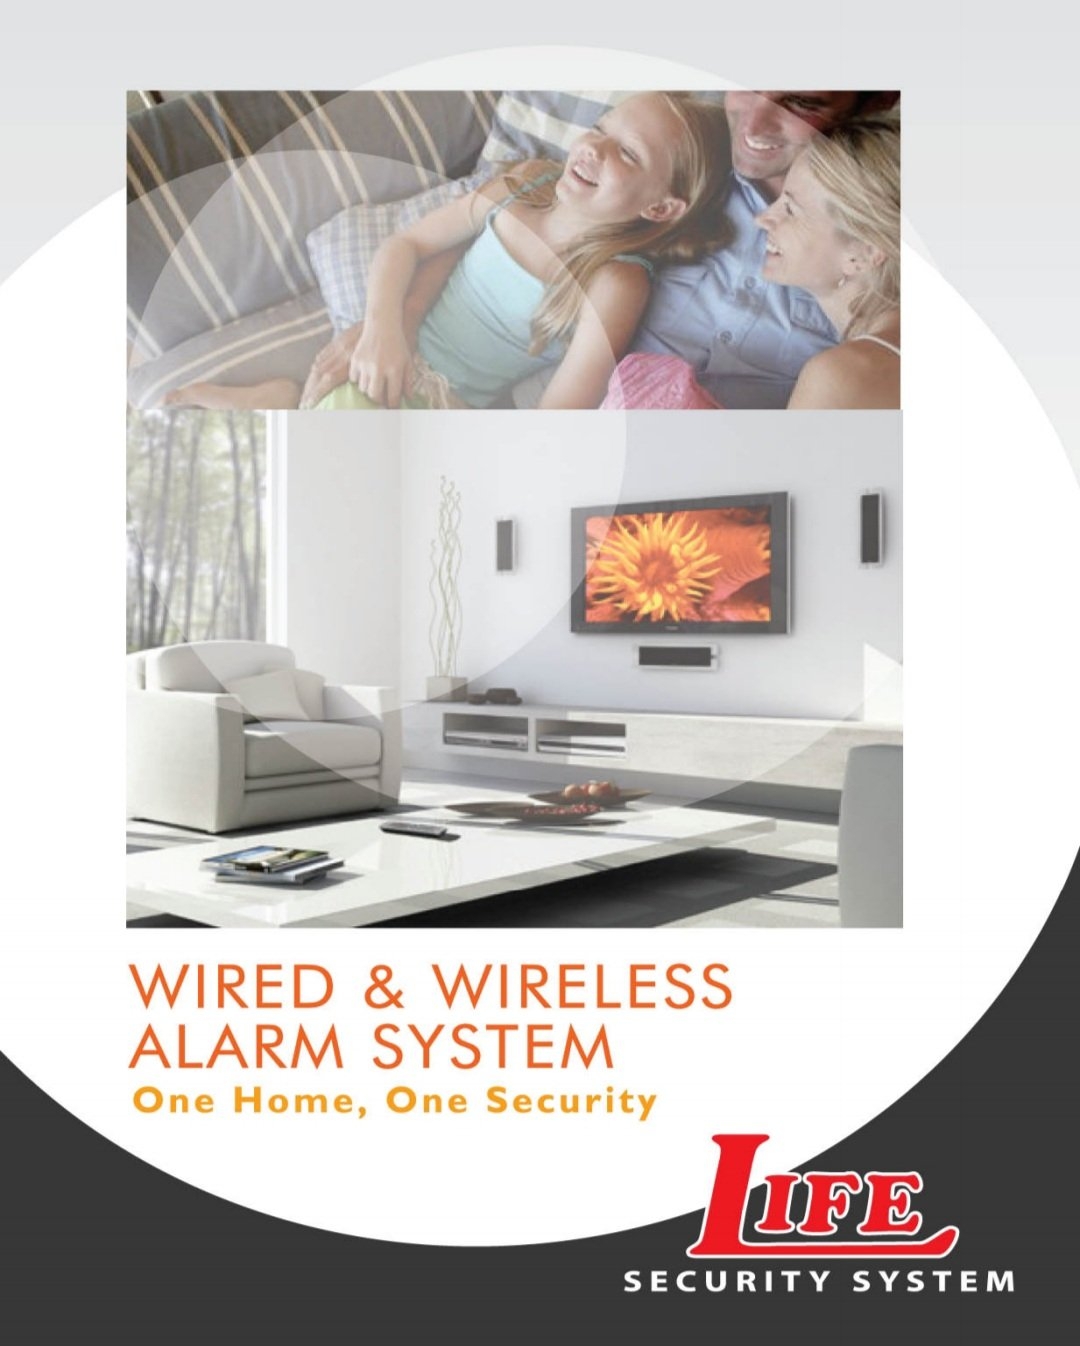 WIRED & WIRELESS ALARM SYSTEM (LIFE SECURITY SYSTEM)